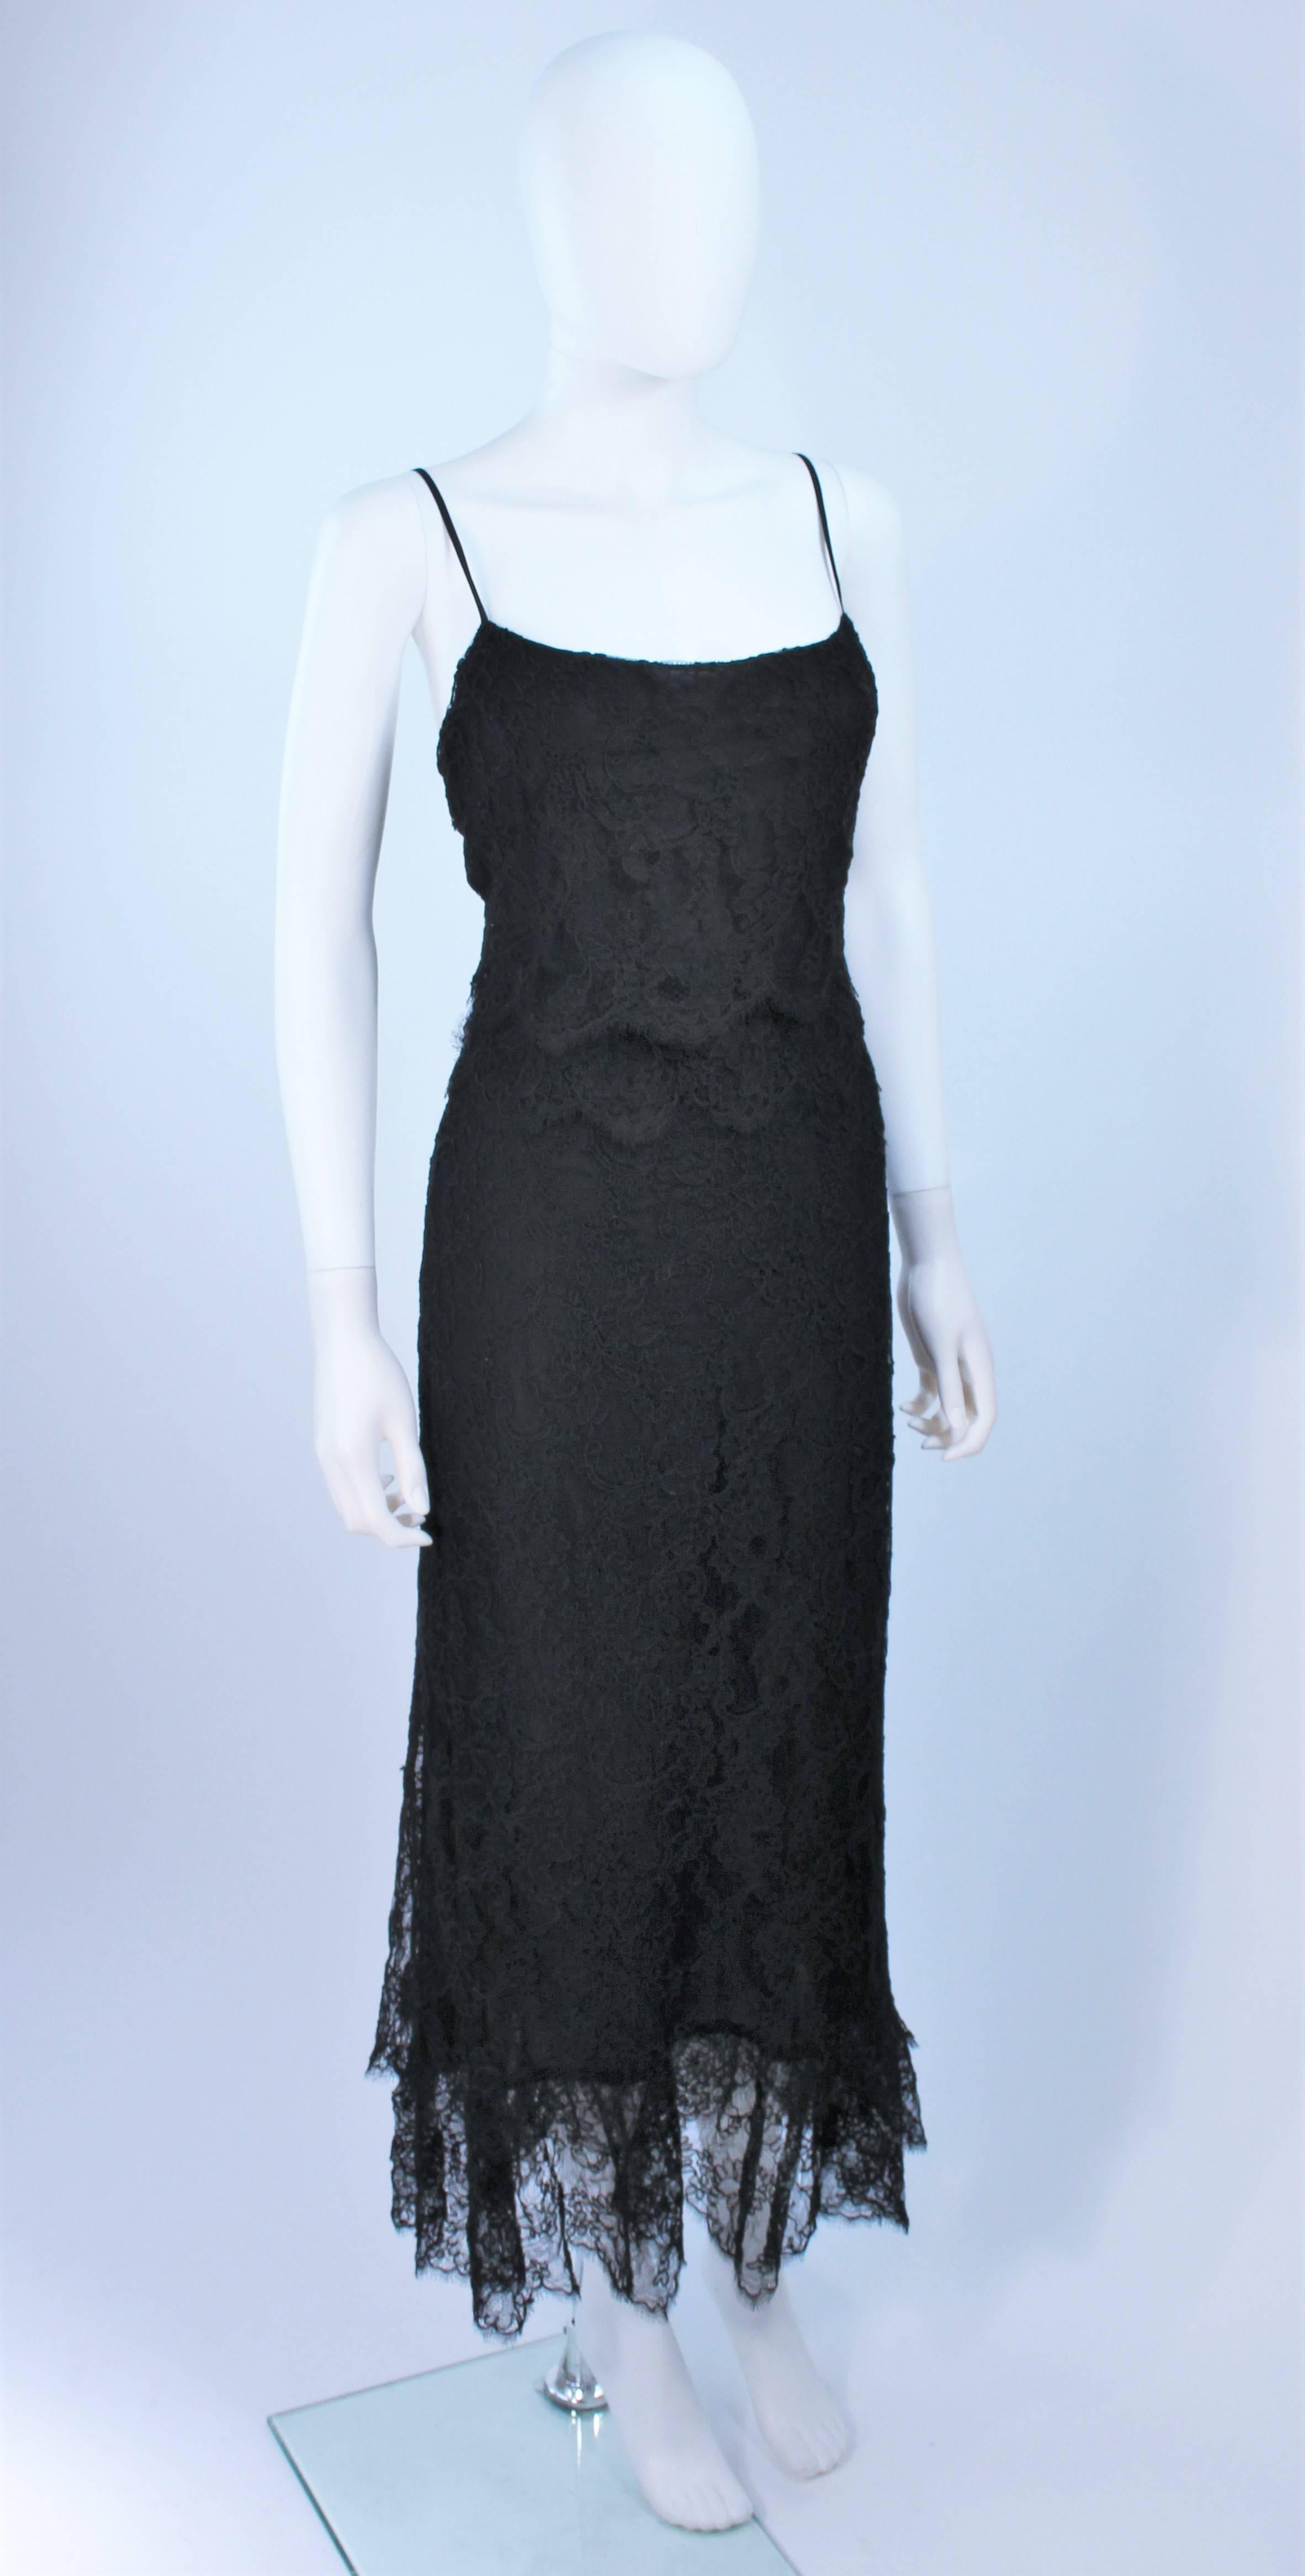 Women's CHANEL Black Tiered Lace Dress Size 10